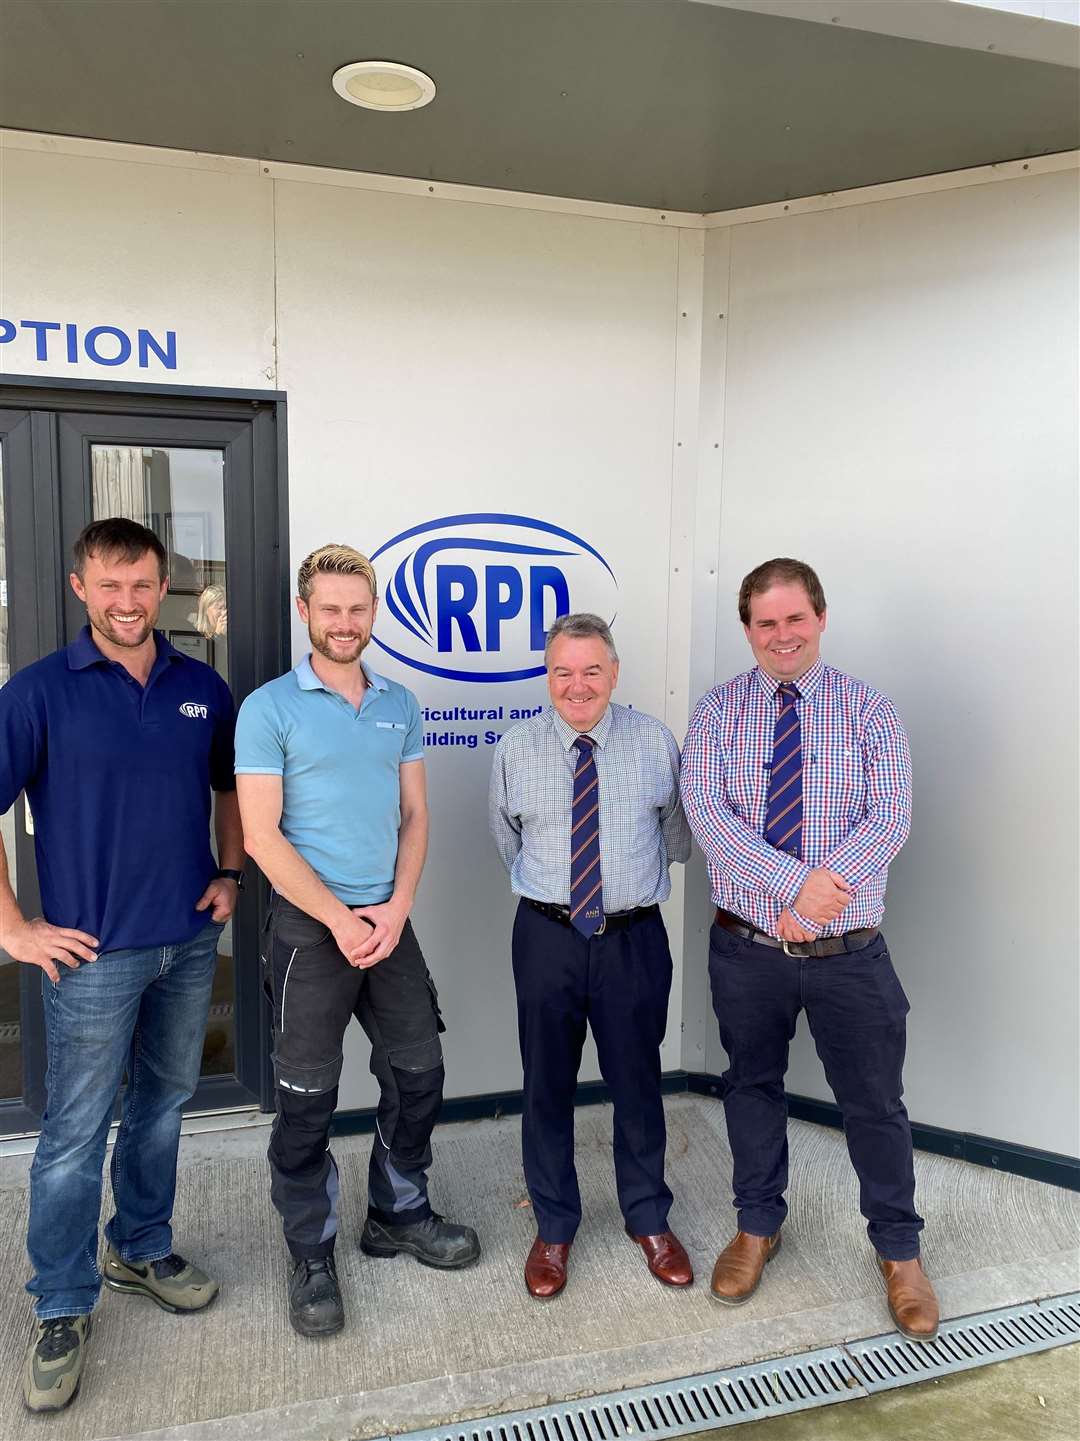 Event sponsors (left) Daniel Duxbury and John-Paul Duxbury of RPD, with Alan Hutcheon, president of the Aberdeen Fatstock Association and Tim McDonald, prime and cull cattle manager of Aberdeen and Northern Marts.